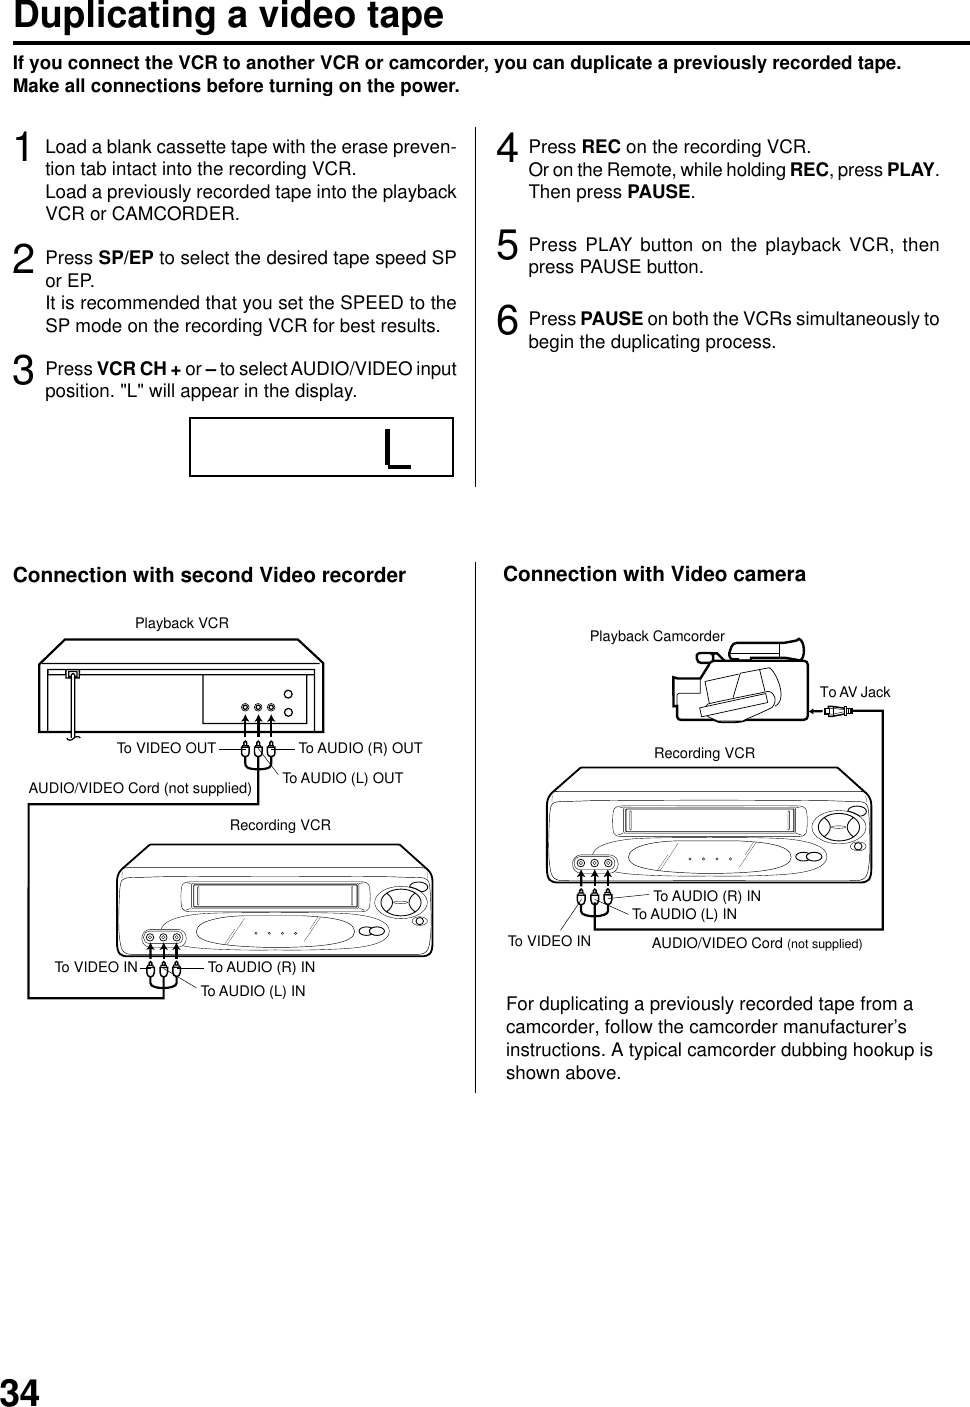 34If you connect the VCR to another VCR or camcorder, you can duplicate a previously recorded tape.Make all connections before turning on the power.Duplicating a video tapeLoad a blank cassette tape with the erase preven-tion tab intact into the recording VCR.Load a previously recorded tape into the playbackVCR or CAMCORDER.1Press SP/EP to select the desired tape speed SPor EP.It is recommended that you set the SPEED to theSP mode on the recording VCR for best results.2Press VCR CH + or – to select AUDIO/VIDEO inputposition. &quot;L&quot; will appear in the display.3Press REC on the recording VCR.Or on the Remote, while holding REC, press PLAY.Then press PAUSE.4Press PLAY button on the playback VCR, thenpress PAUSE button.5Press PAUSE on both the VCRs simultaneously tobegin the duplicating process.6For duplicating a previously recorded tape from acamcorder, follow the camcorder manufacturer’sinstructions. A typical camcorder dubbing hookup isshown above.To AUDIO (L) INTo AUDIO (L) OUTAUDIO/VIDEO Cord (not supplied)Playback VCRTo VIDEO OUT To AUDIO (R) OUTRecording VCRTo VIDEO IN To AUDIO (R) INAUDIO/VIDEO Cord (not supplied)To AUDIO (R) INTo AUDIO (L) INTo VIDEO INRecording VCRTo AV JackPlayback CamcorderConnection with second Video recorder Connection with Video camera